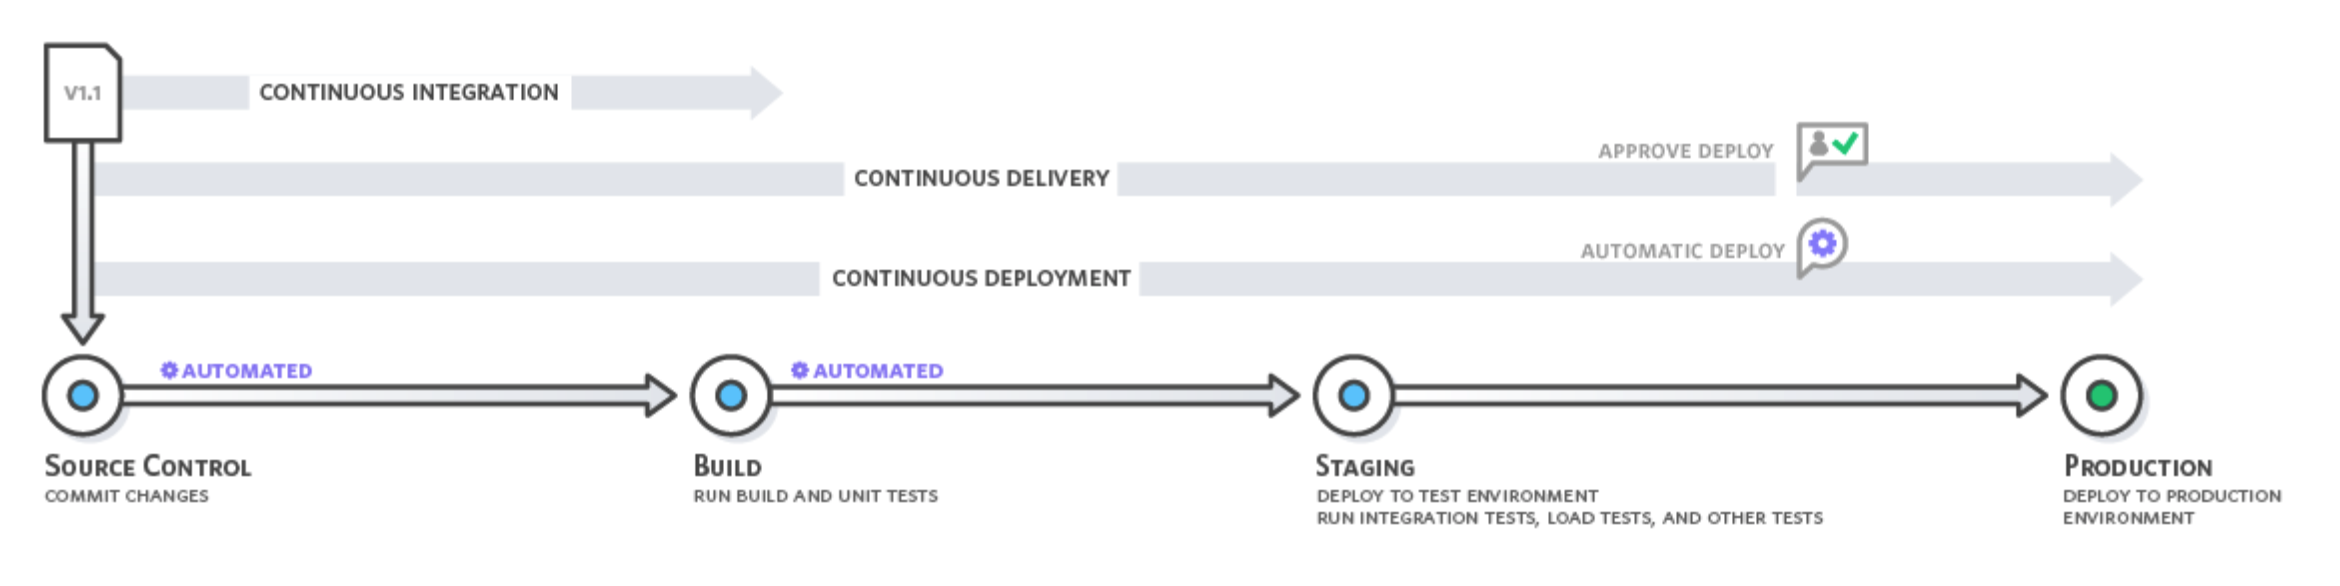 Continuous Integration example